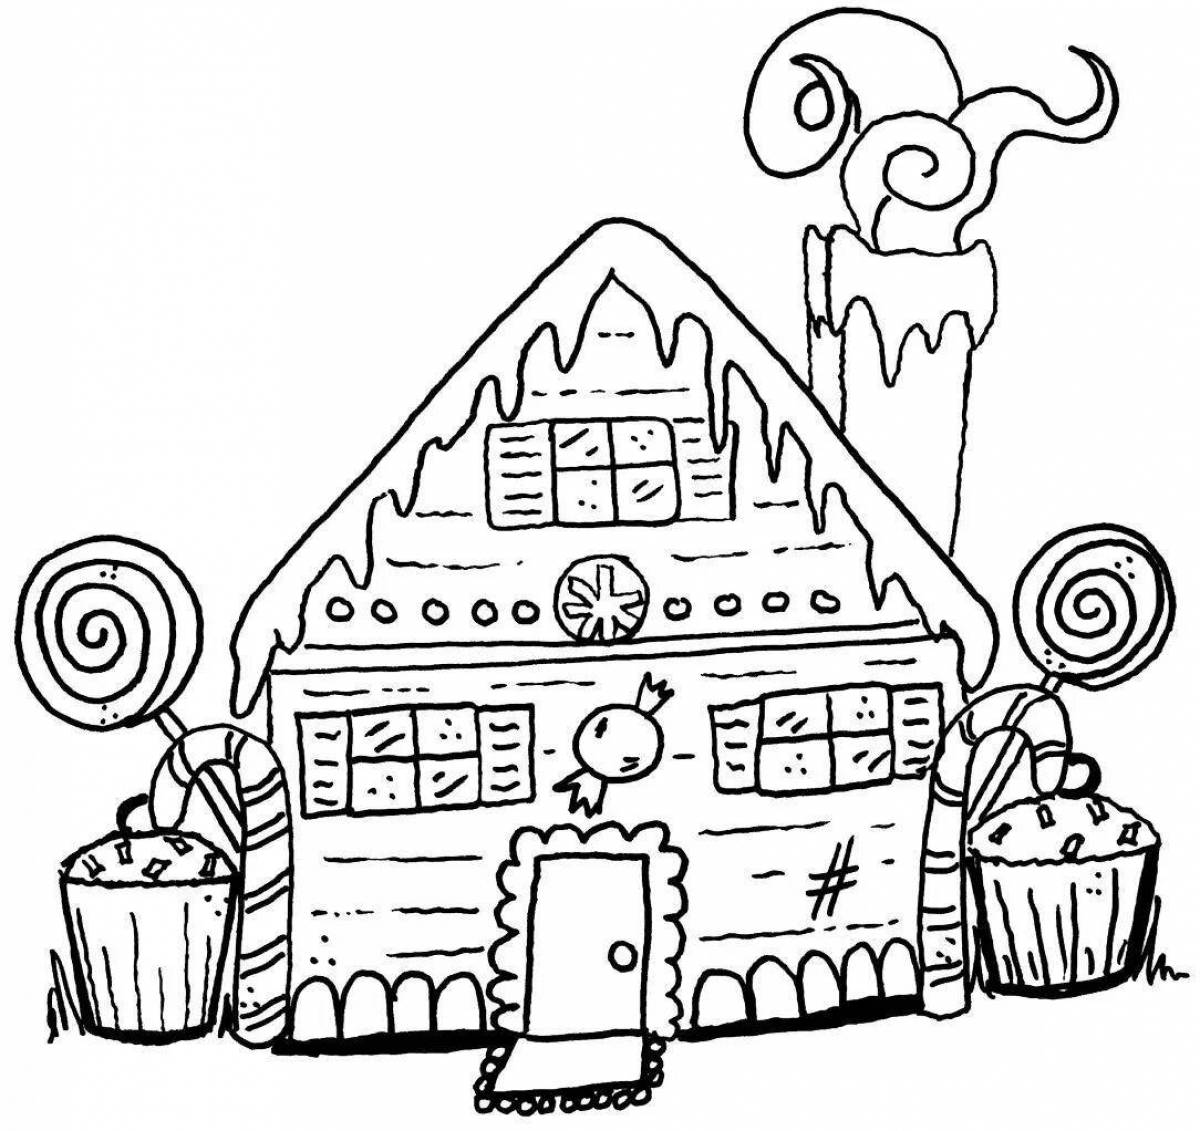 Hansel and Gretel funny coloring book